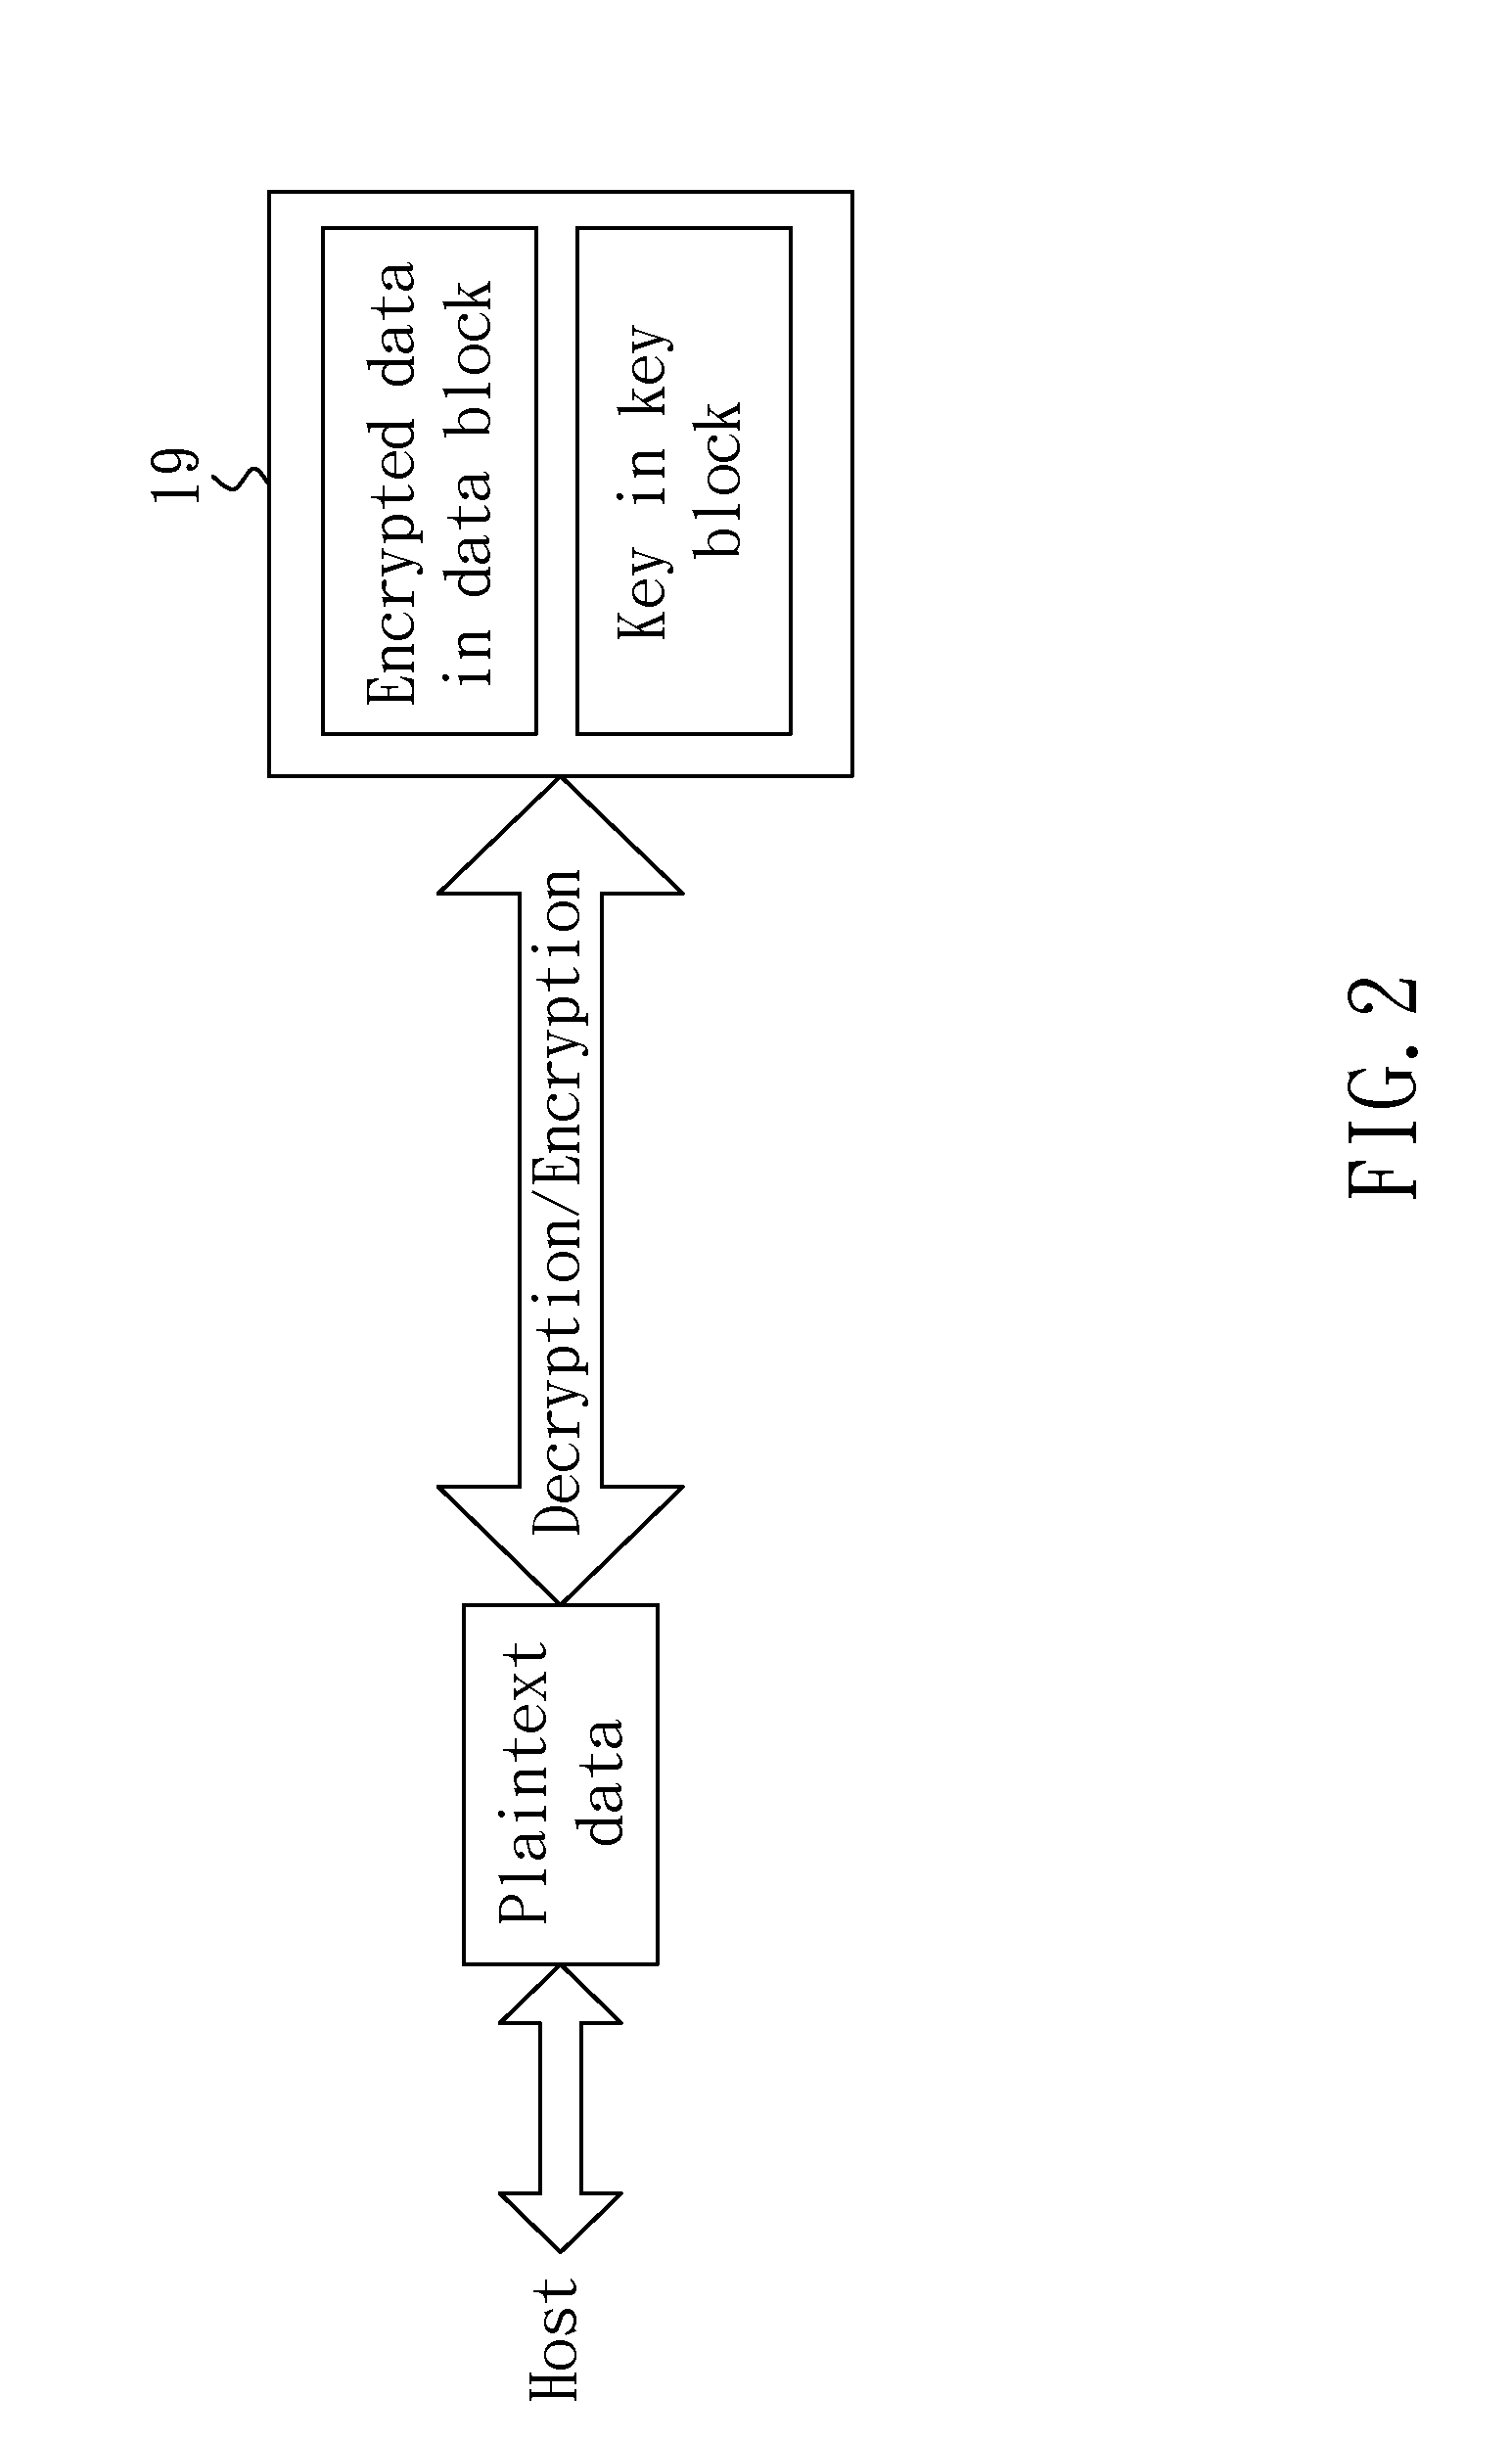 Secure erase system for a solid state non-volatile memory device